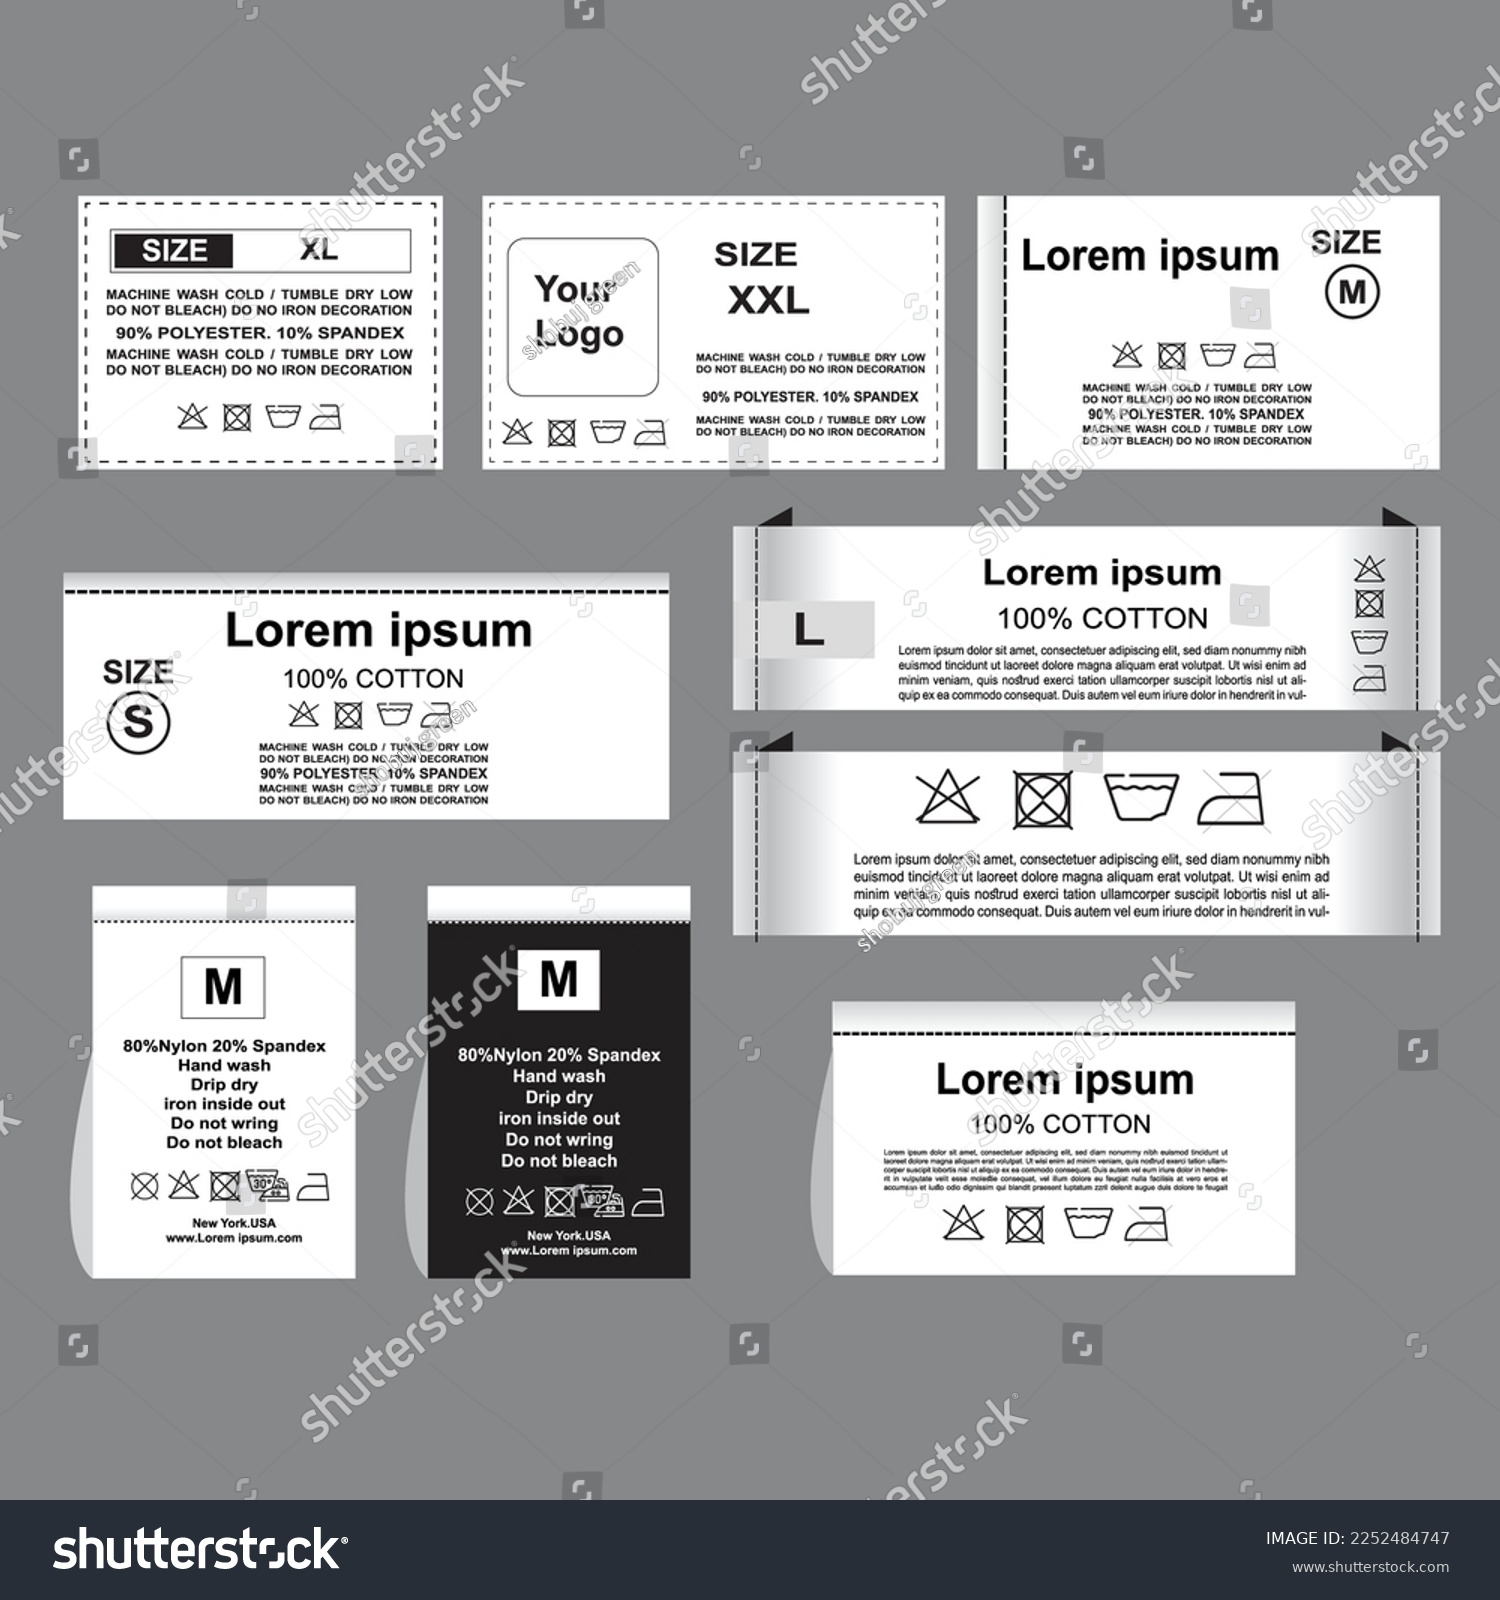 SVG of Laundry washing labels.  information for washing temperature and care textile clothes tailoring shirt  pant t-shirt all goods cotton instruction vector file
 svg